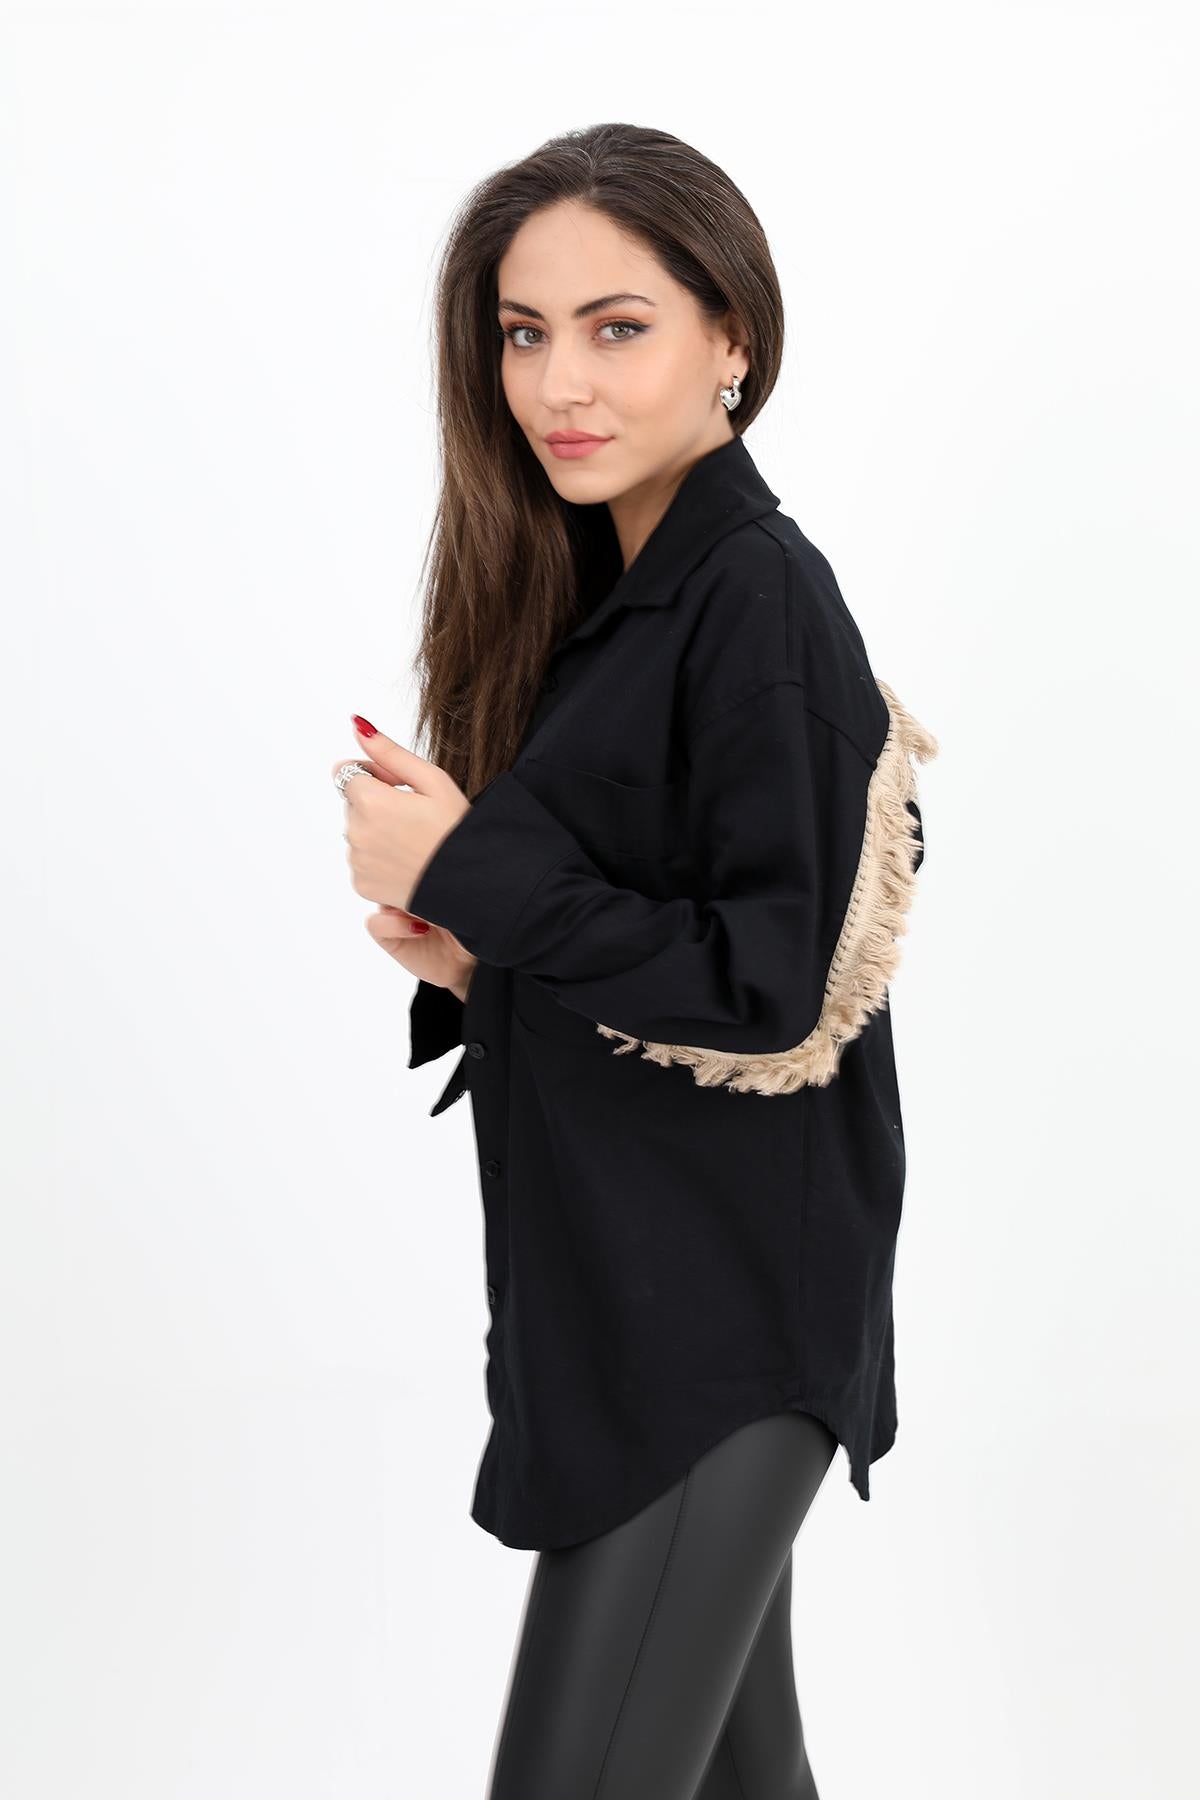 Women's Shirt Gabardine Embroidered on the Back with Tassels - Black - STREETMODE ™